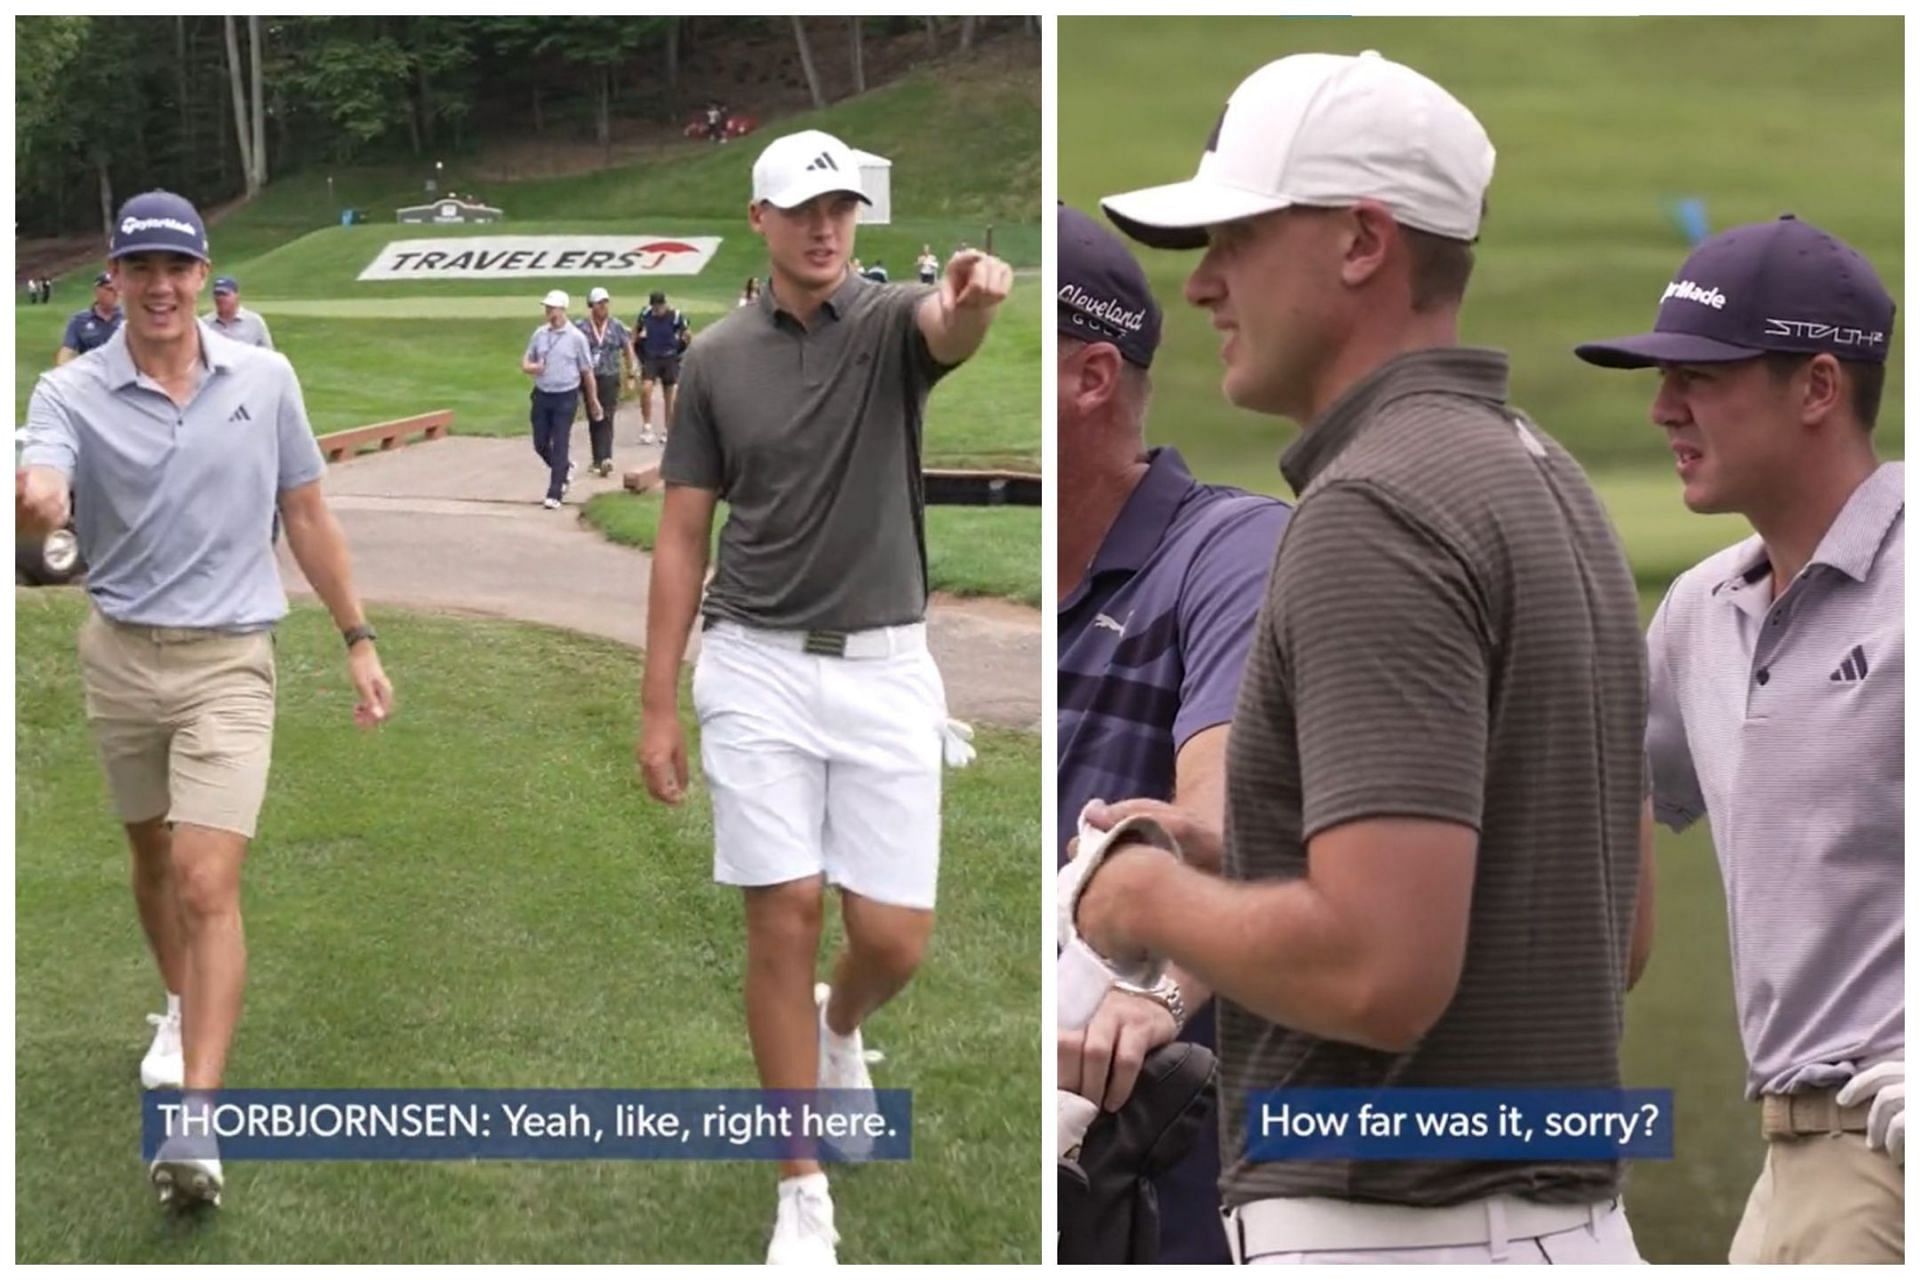 Michael Thorbjornsen shared his last year experience at Travelers Championship with PGA Tour rookie Ludvig Aberg( Image via Twitter.com/pgatour)